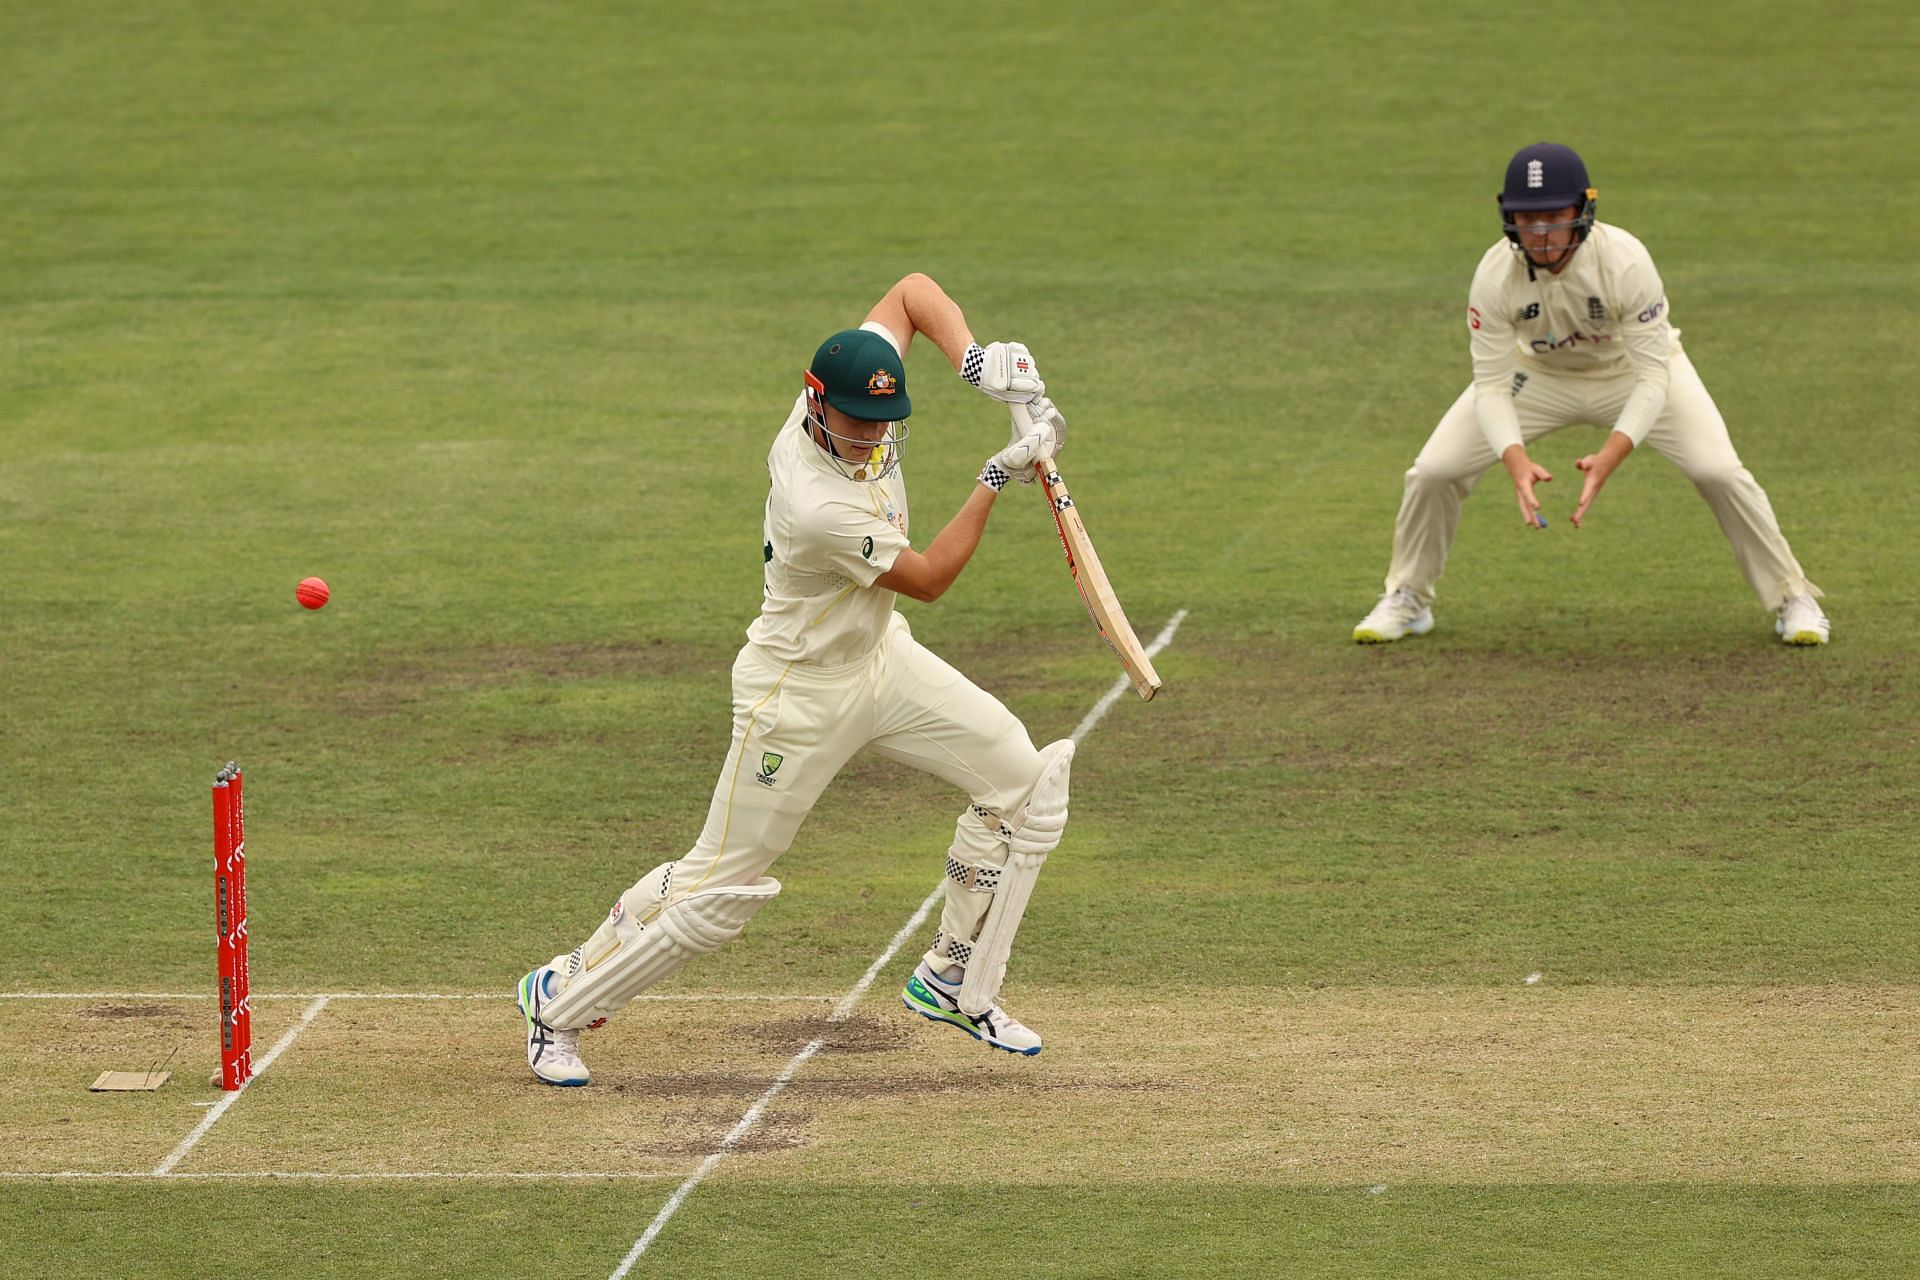 Cameron Green has shown improvement both as a batsman and bowler in recent times